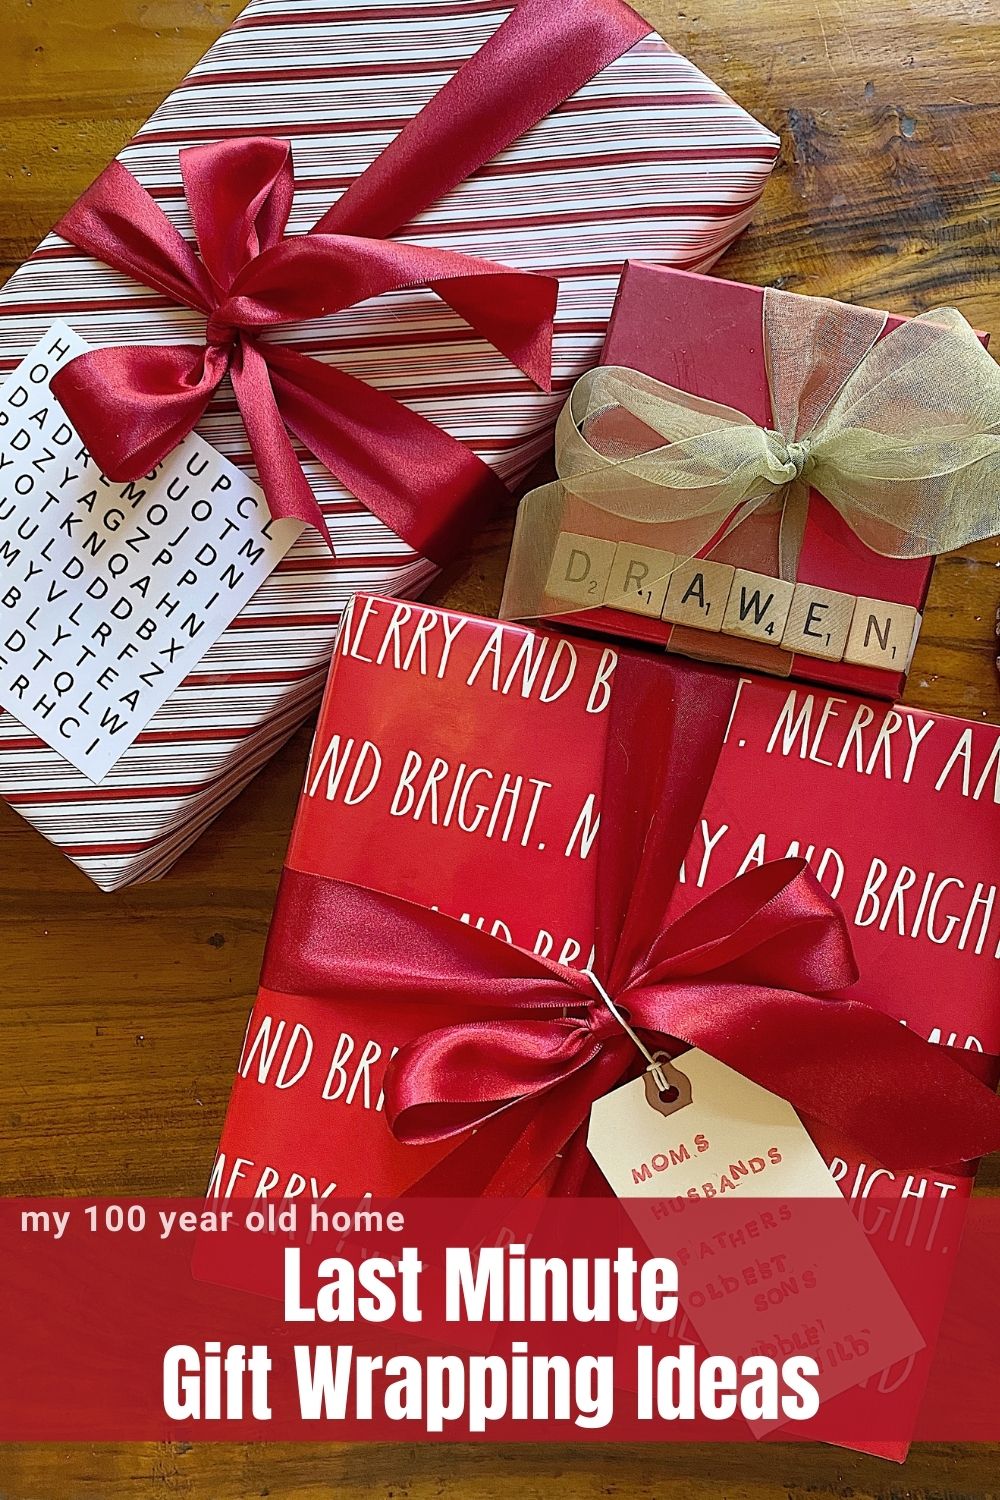 It's only a few days until Christmas so I thought it might be fun to share some fun last minute gift wrapping ideas.